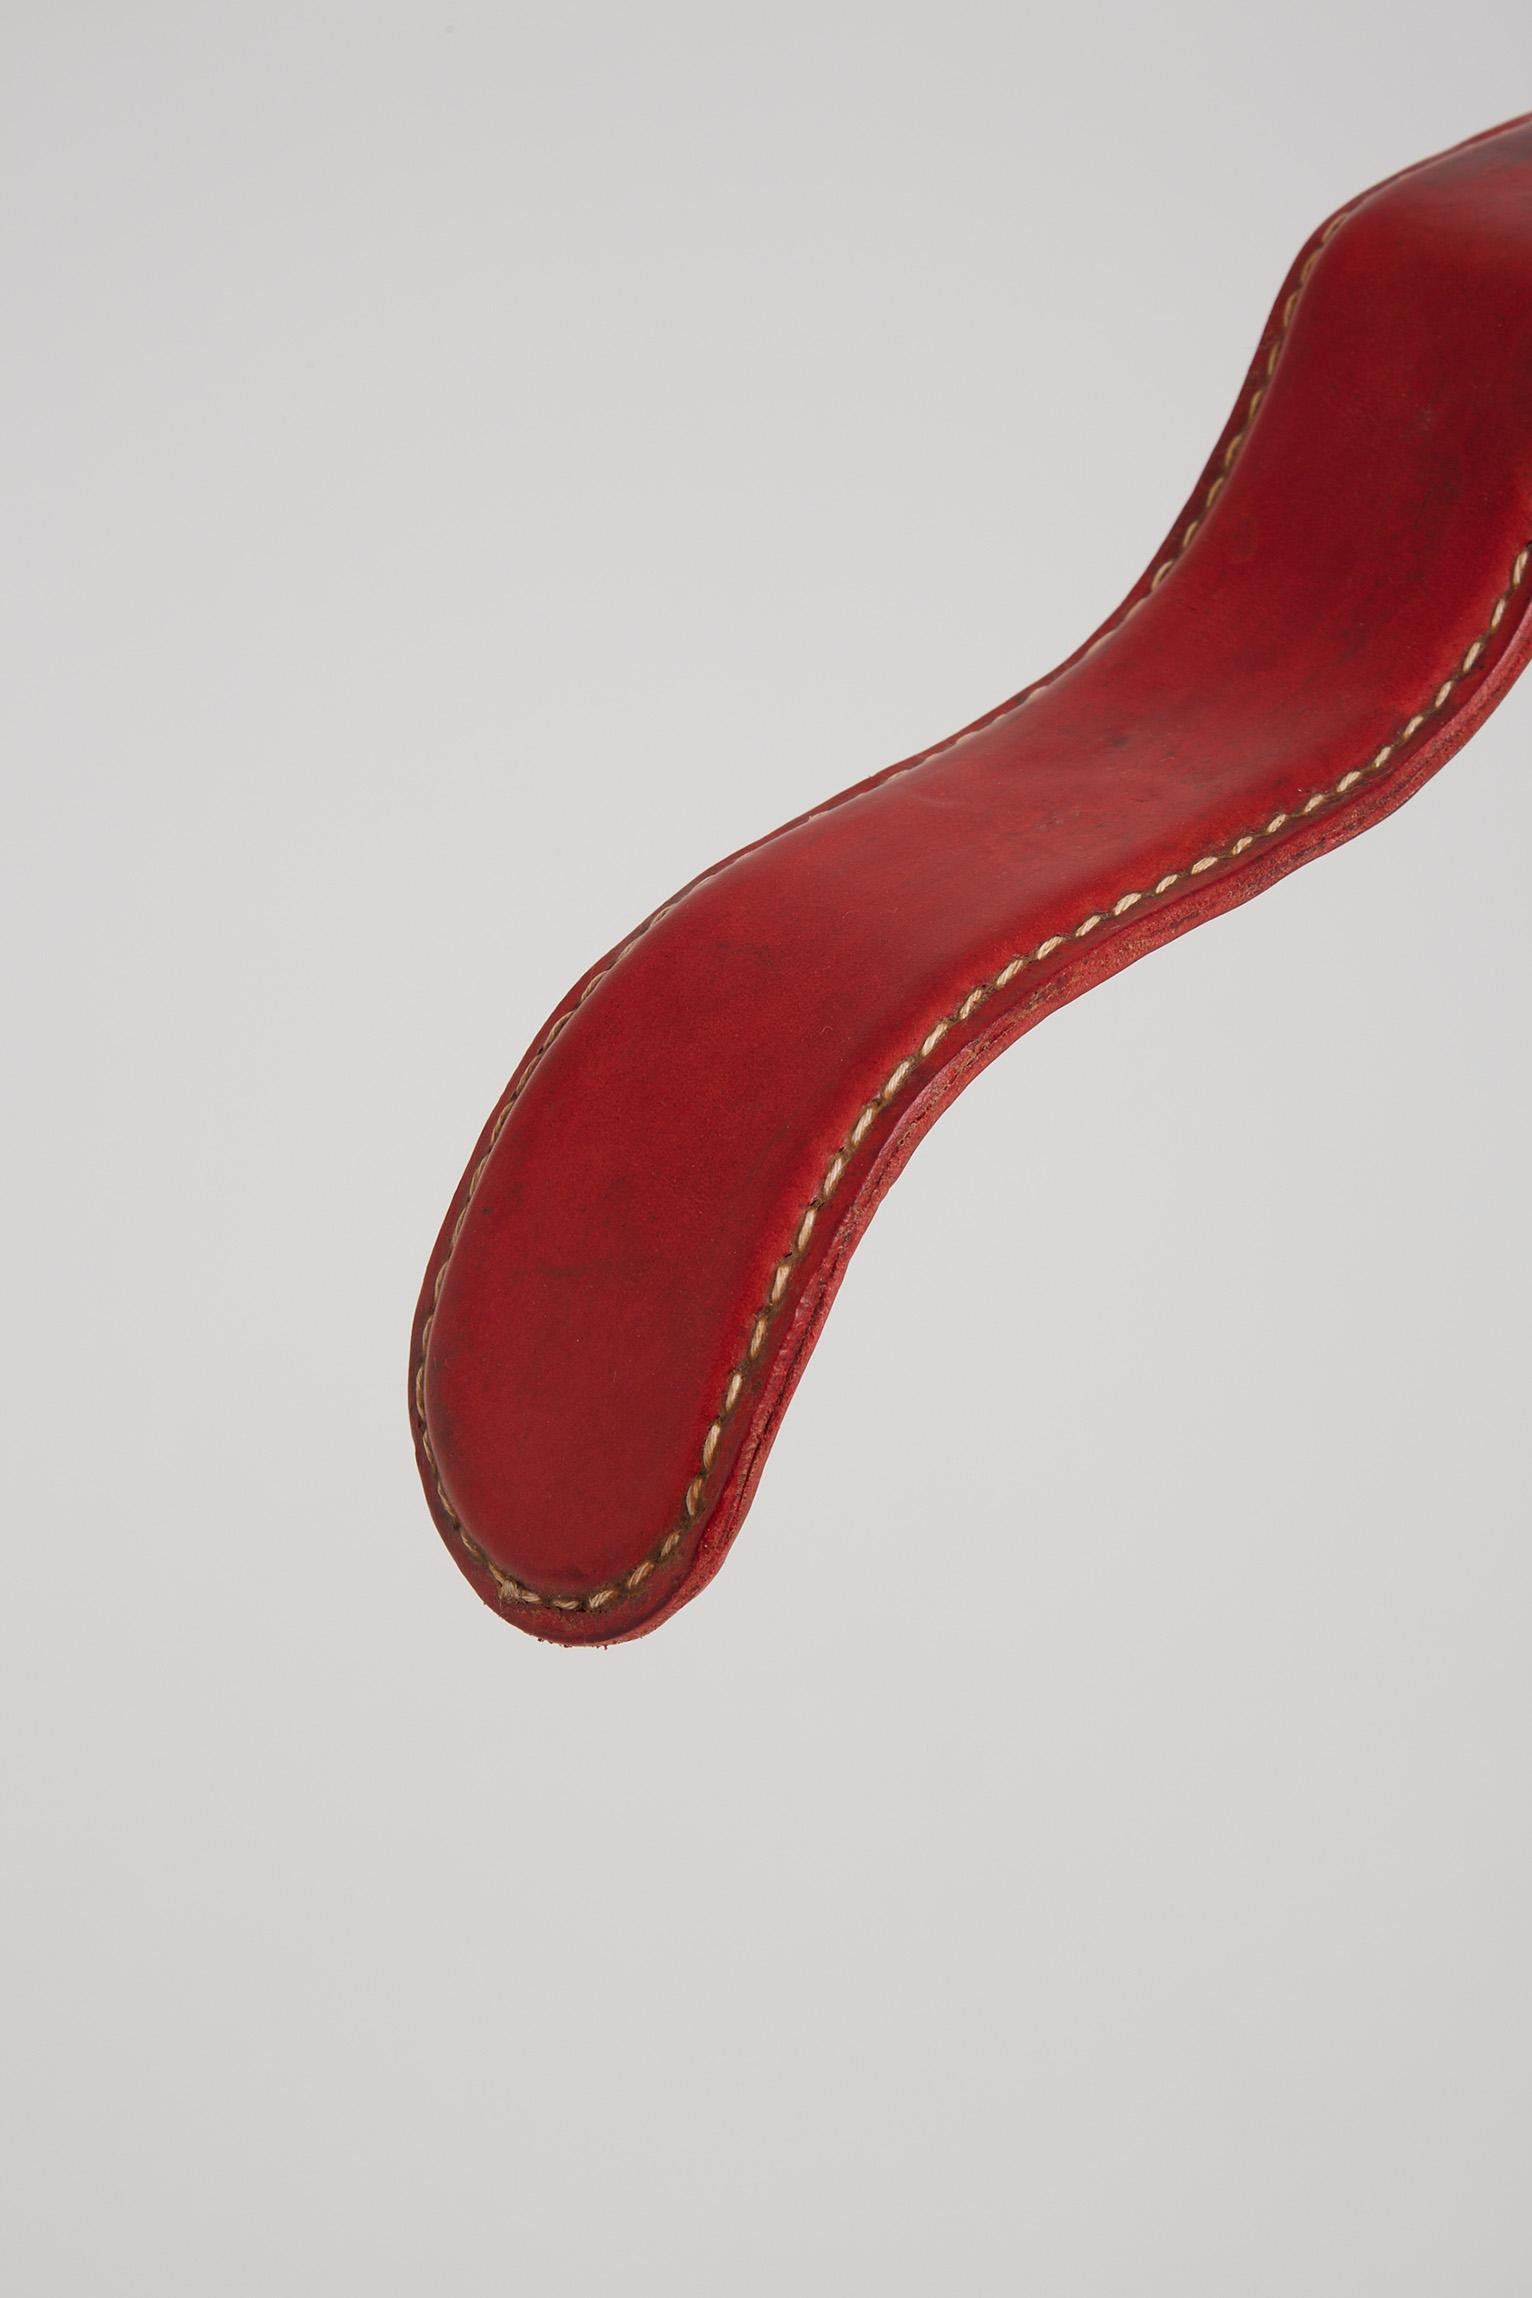 20th Century Red Leather Valet by Jacques Adnet (1900-1984)